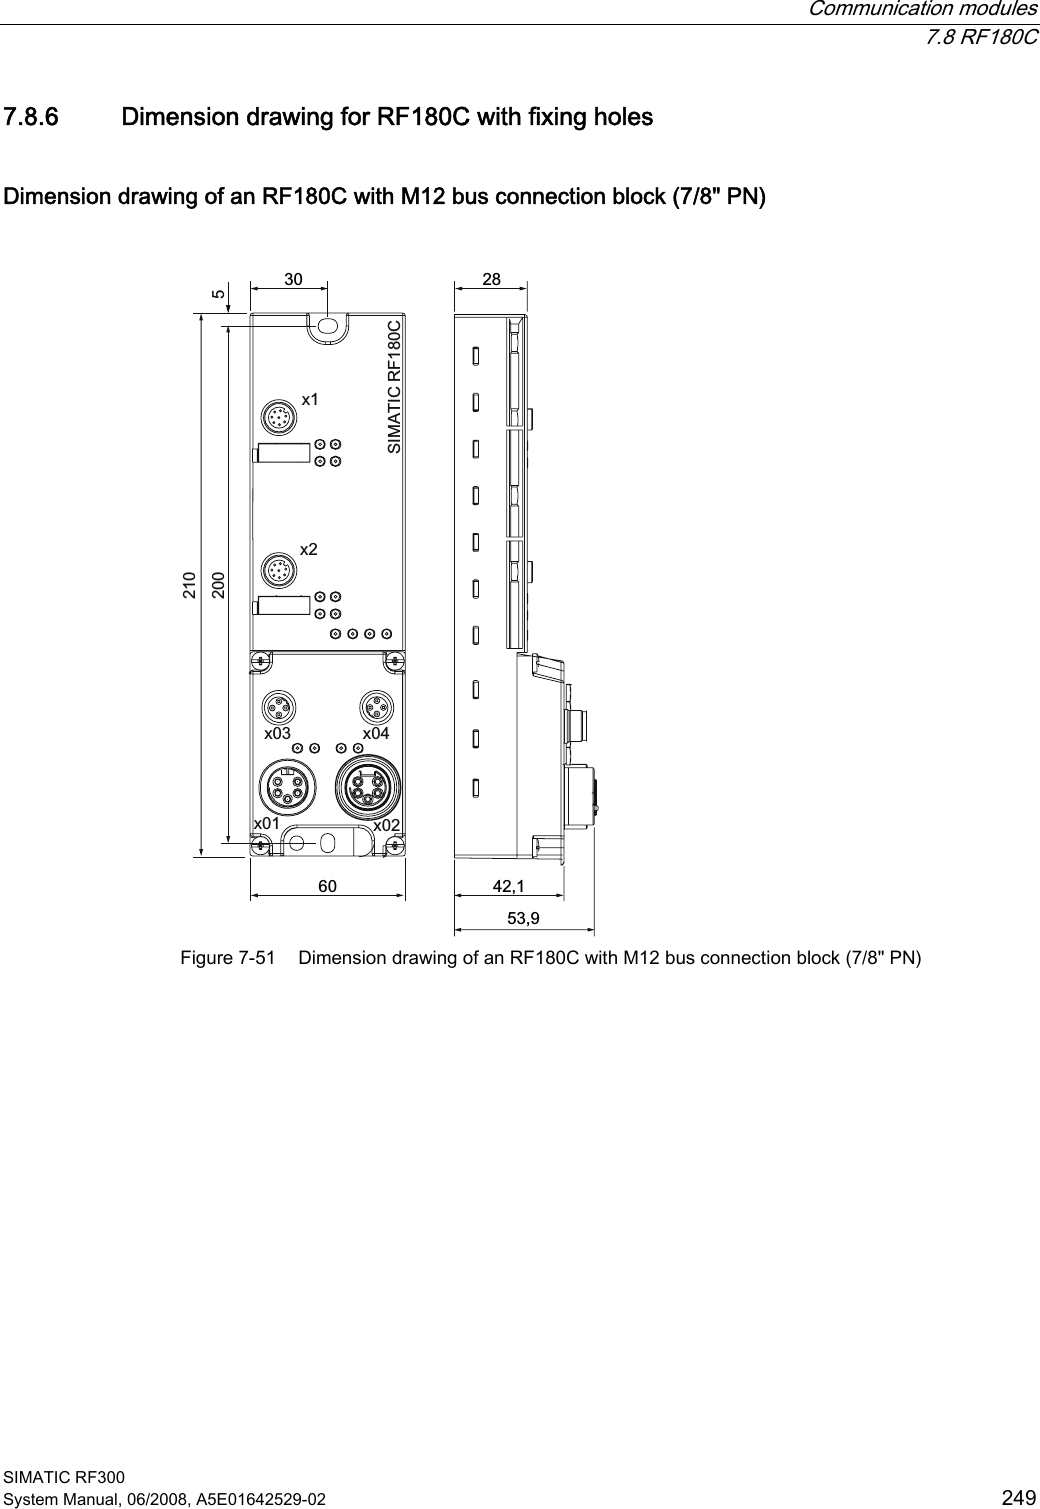  Communication modules  7.8 RF180C SIMATIC RF300 System Manual, 06/2008, A5E01642529-02  249 7.8.6 Dimension drawing for RF180C with fixing holes Dimension drawing of an RF180C with M12 bus connection block (7/8&quot; PN)   [[6,0$7,&amp;5)&amp;[ [[ [ Figure 7-51  Dimension drawing of an RF180C with M12 bus connection block (7/8&quot; PN) 